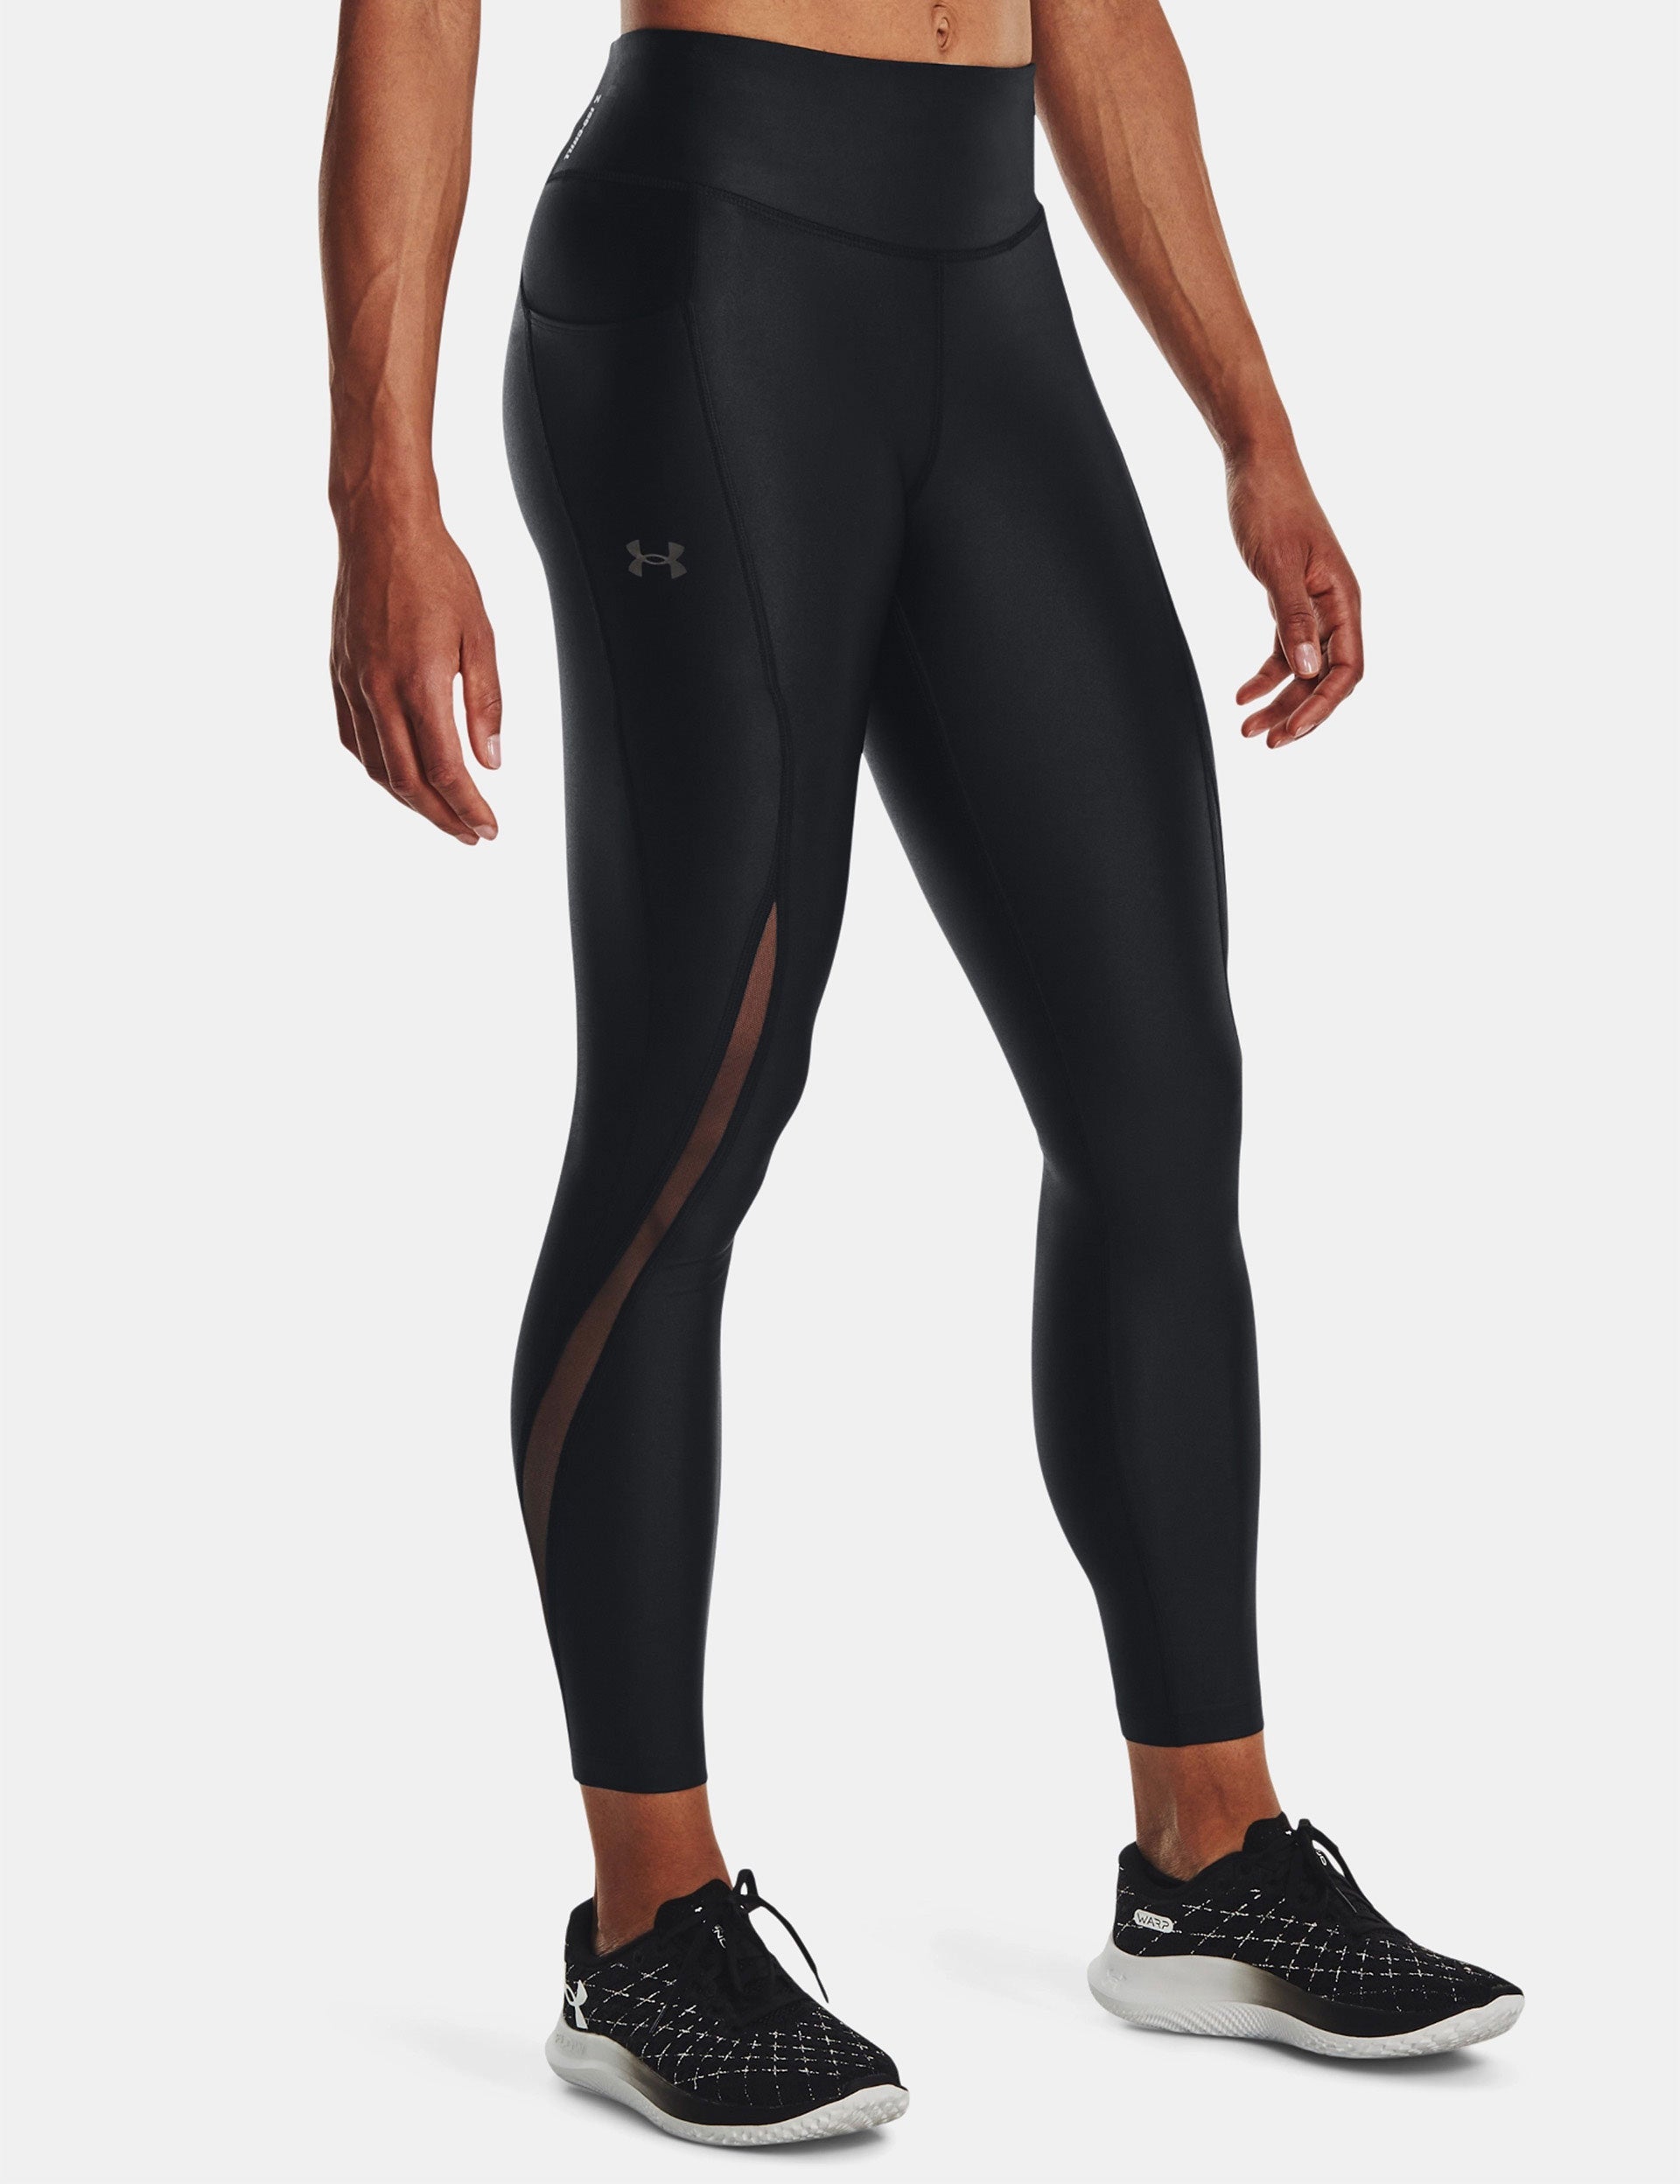 Under Armour Women's Fly-By Printed Run Activewear Capri pants